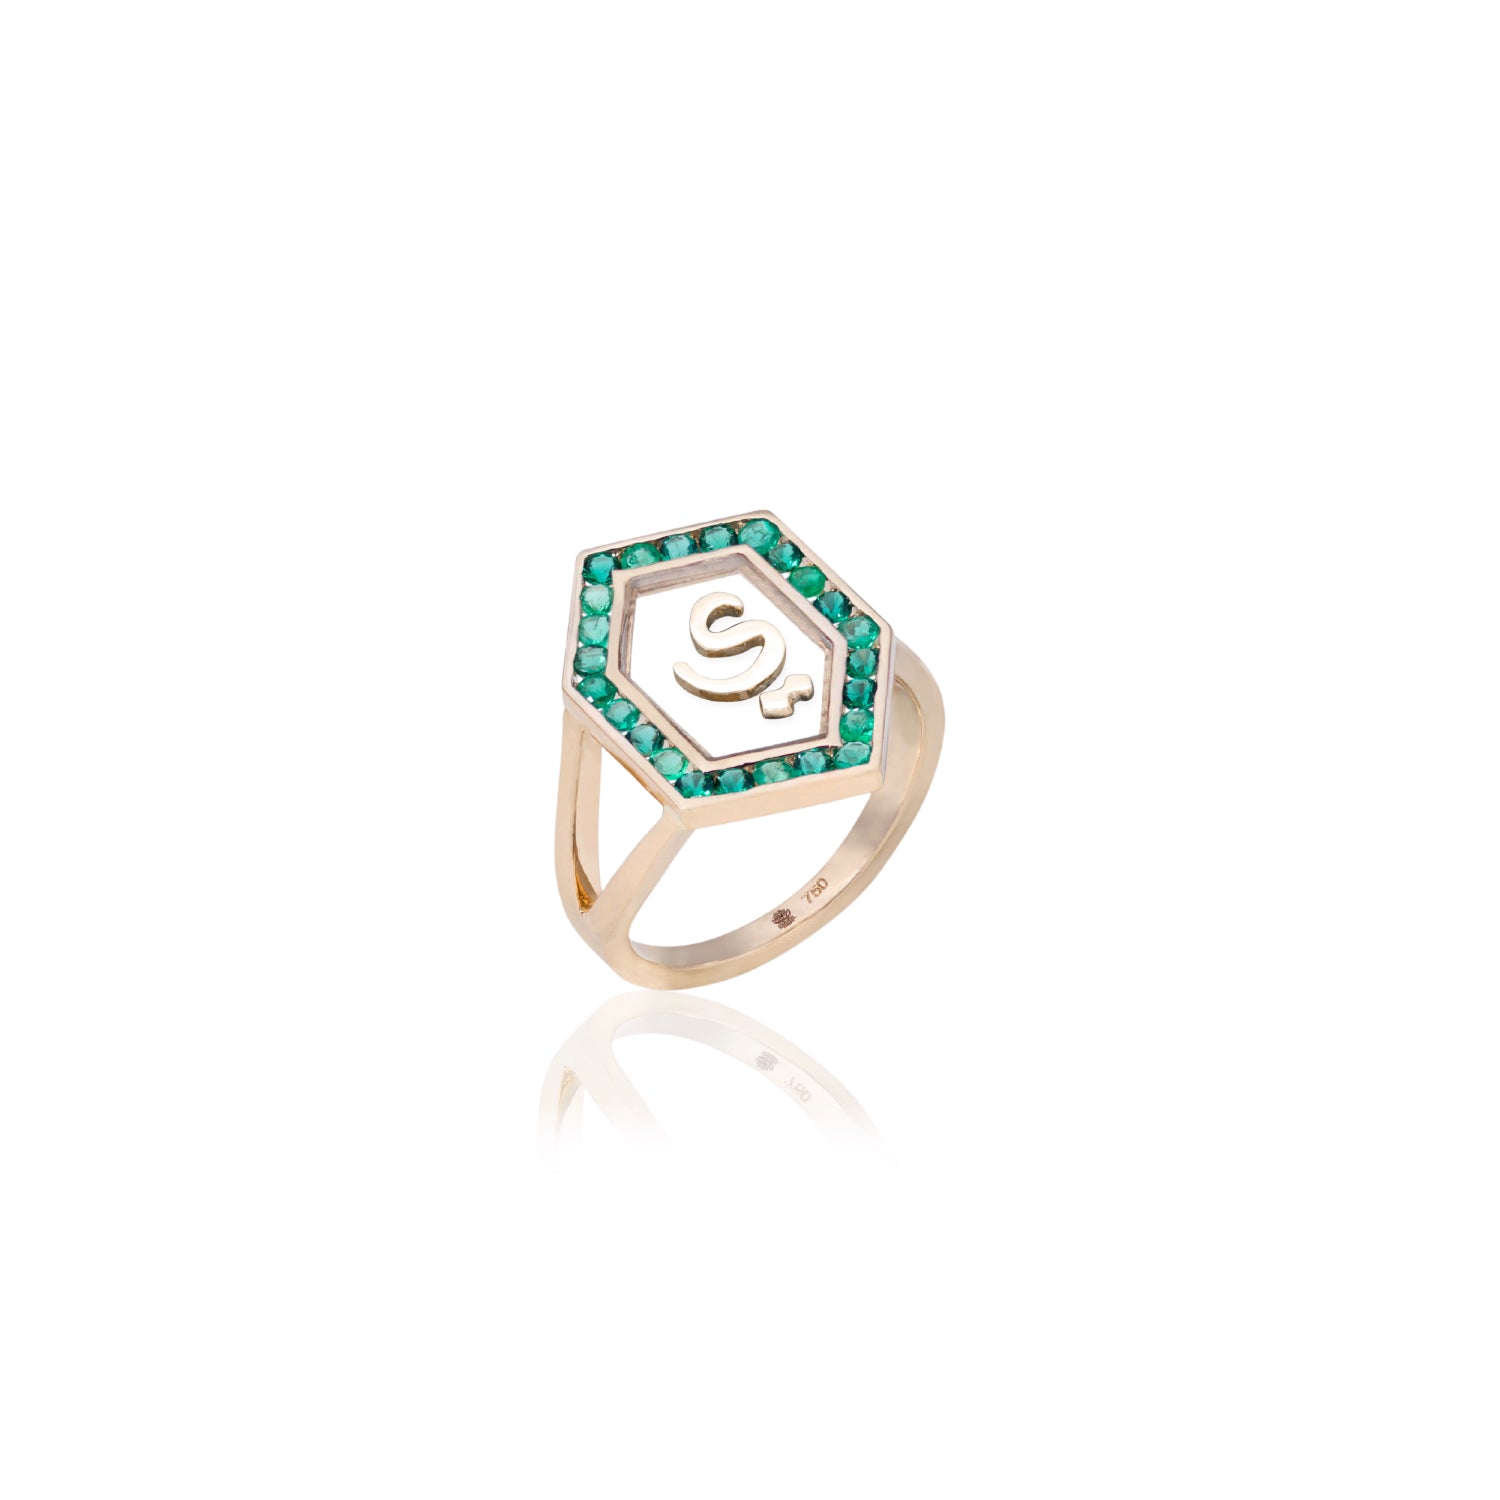 Qamoos 1.0 Letter ي Emerald Ring in Yellow Gold